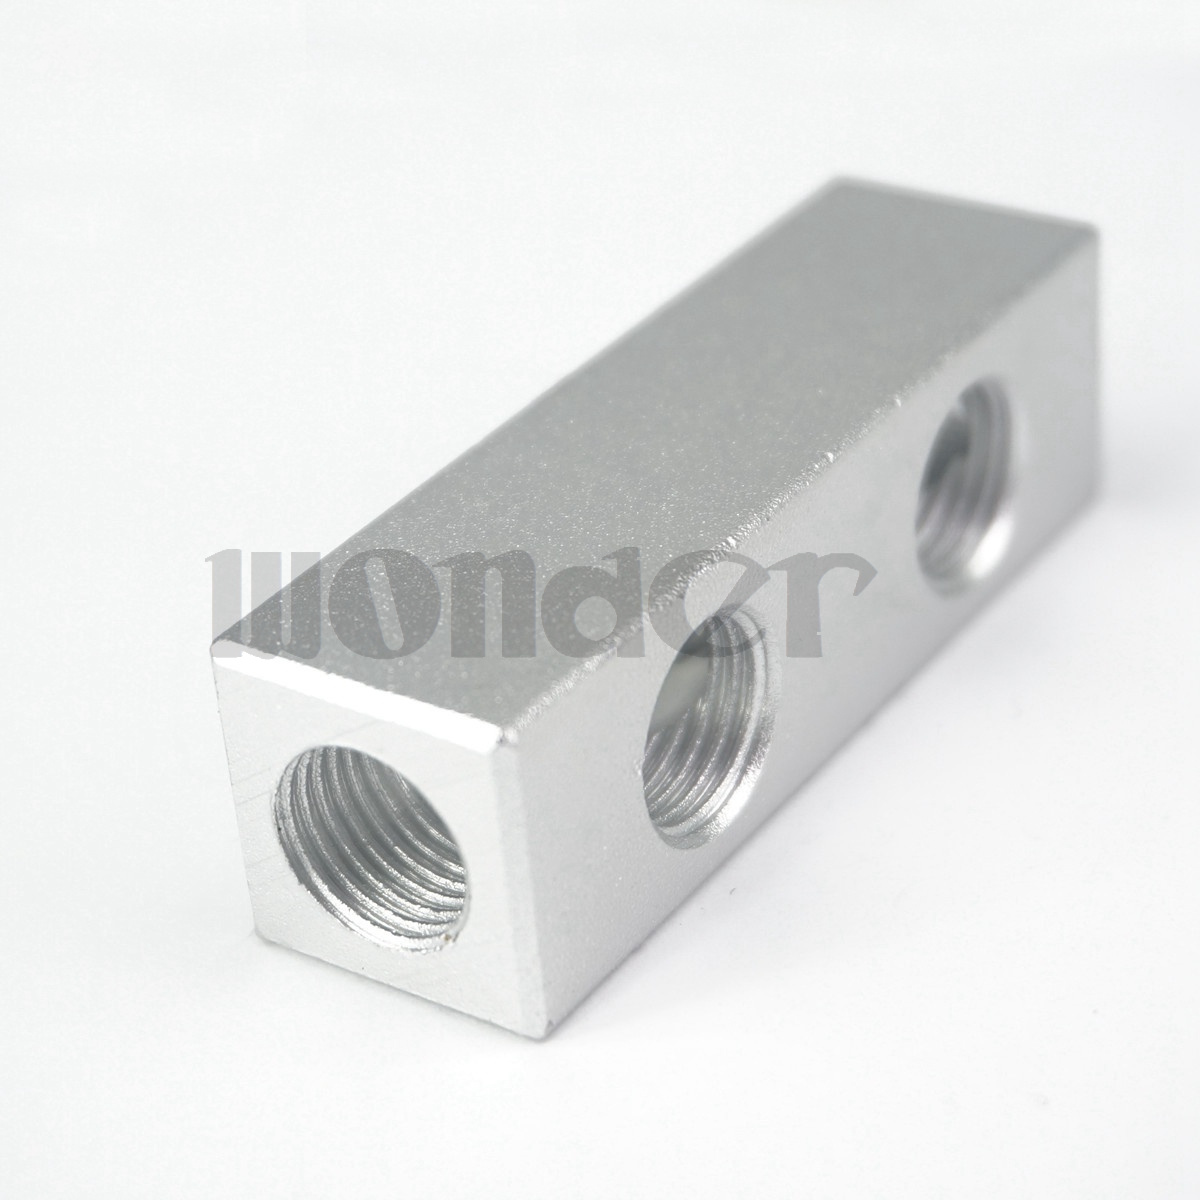 1//4 BSP Manifold 2 x 1//2 Bsp x 5 x 1//4 Bsp Single Sided Outlet Ports